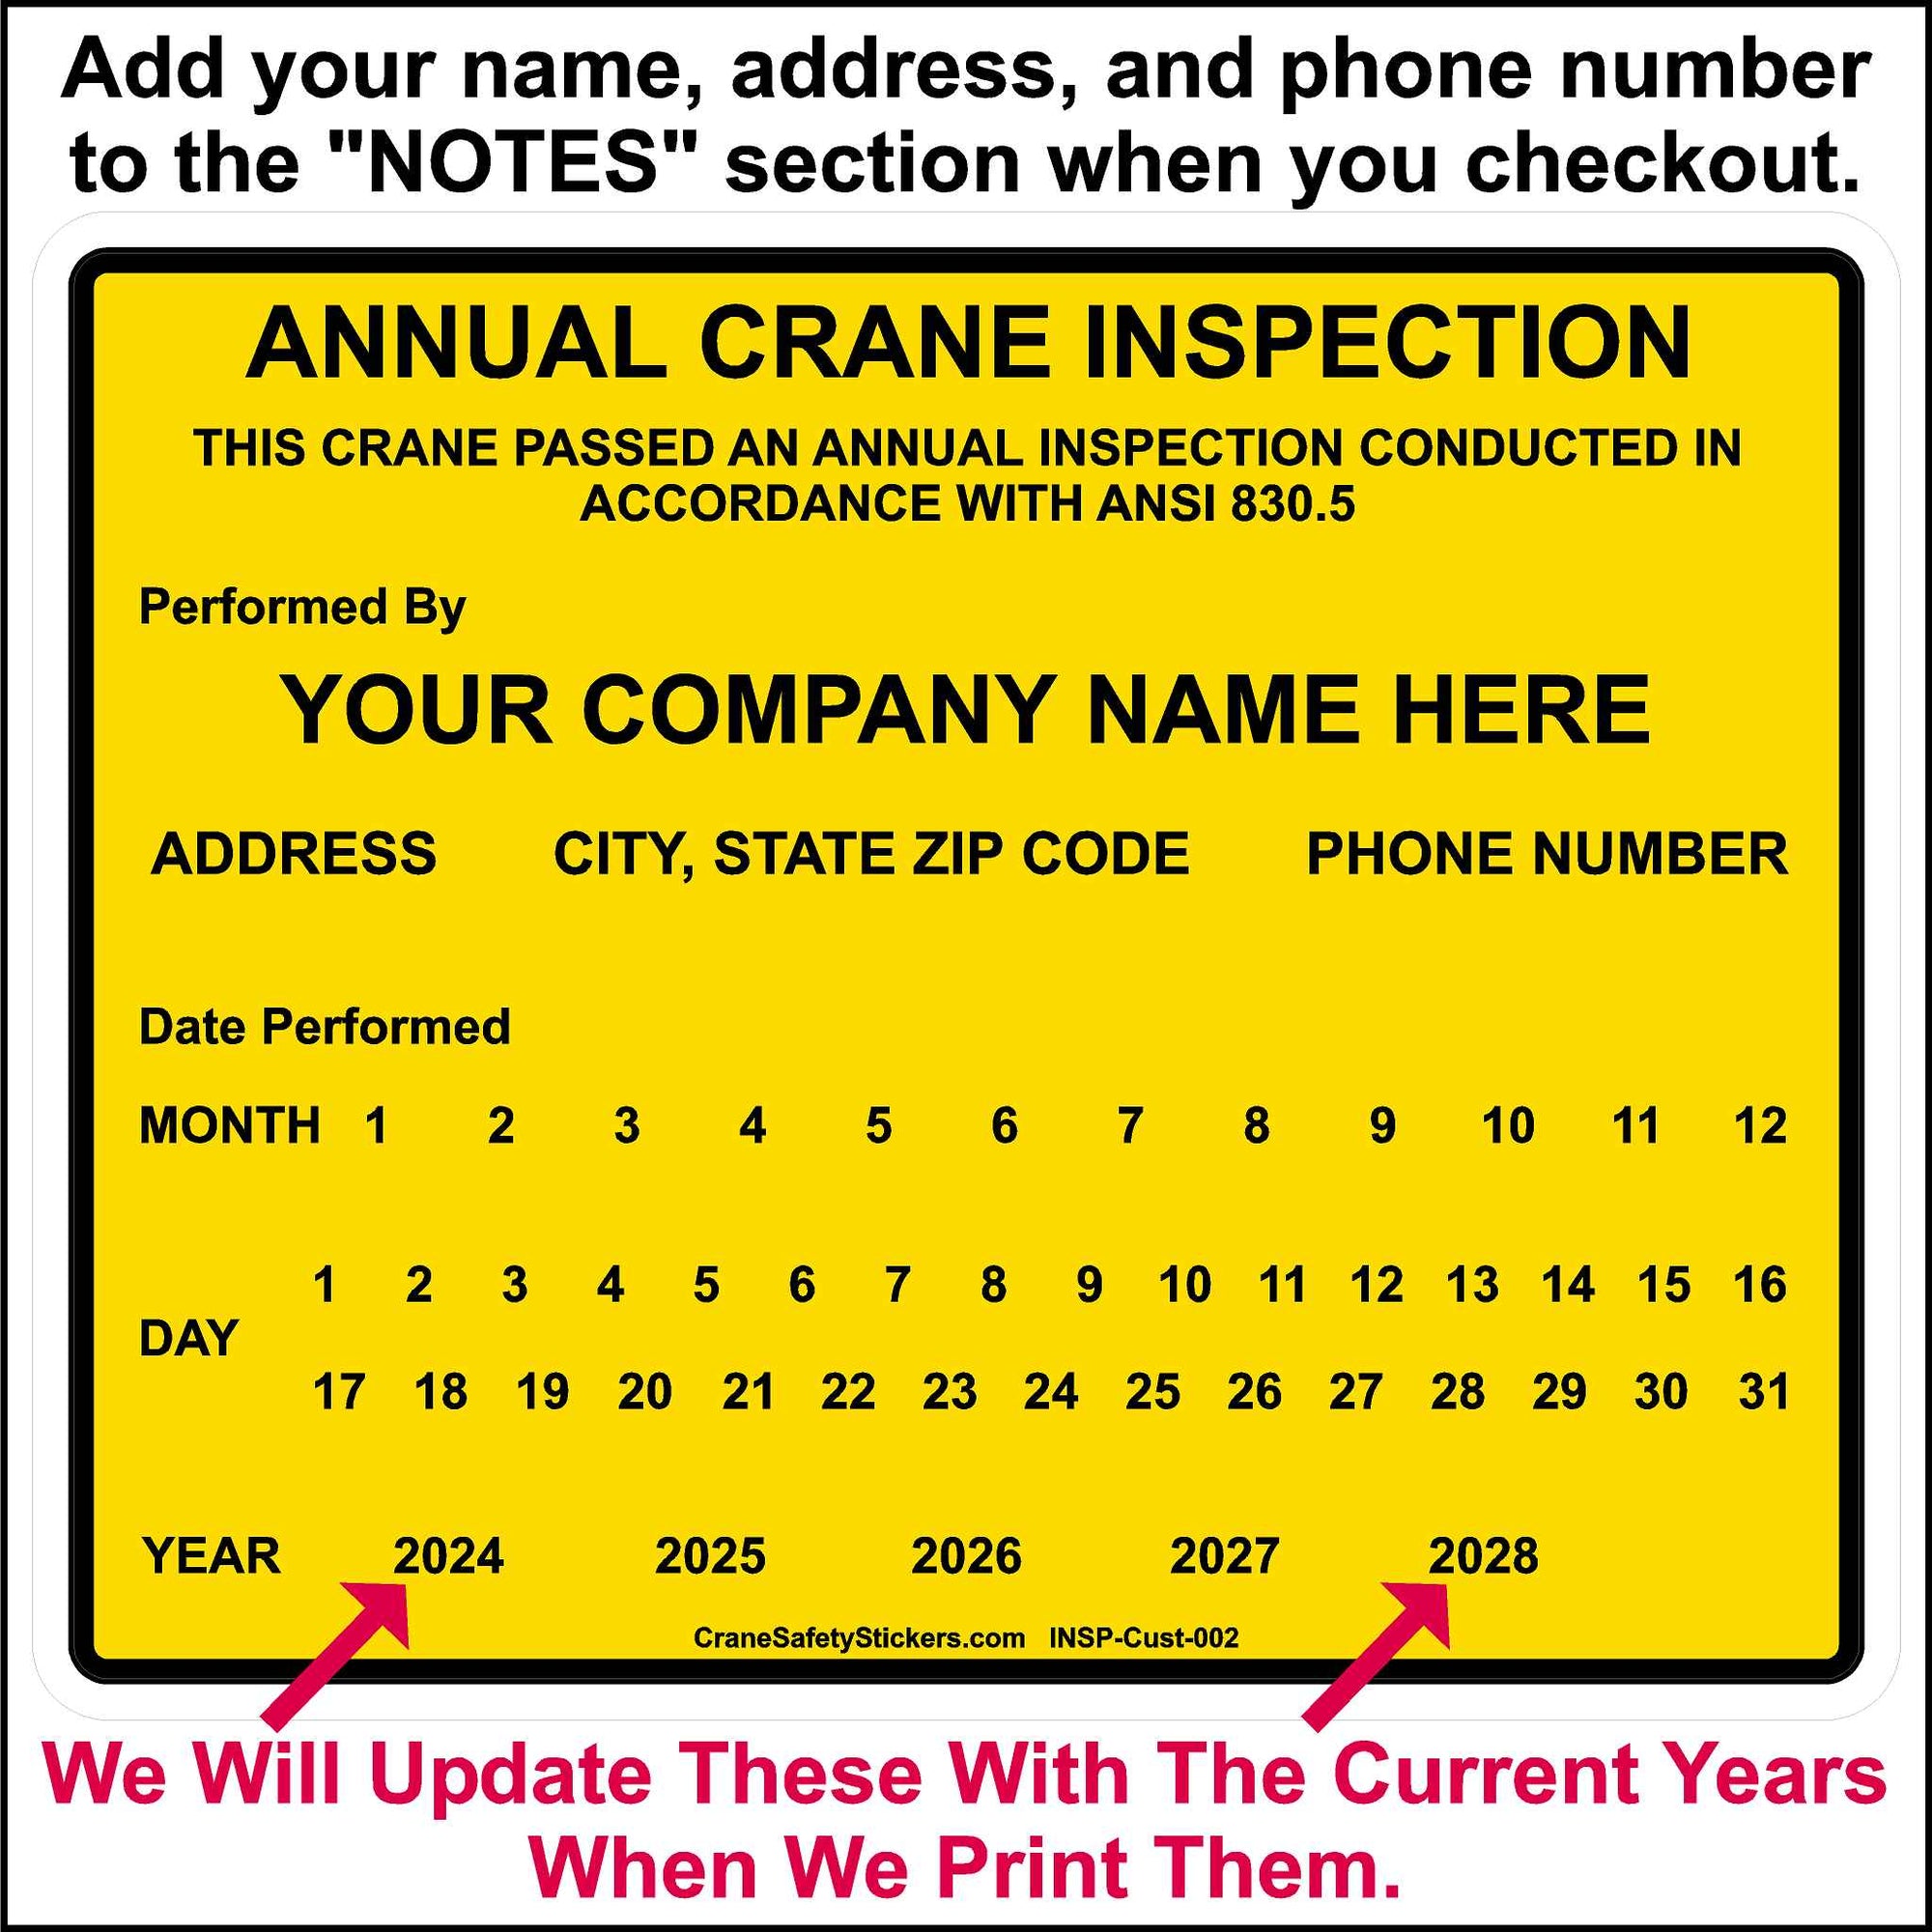 Custom Crane ANSI B30.5 Inspection Sticker. This sticker is printed in yellow with black lettering. It has spaces to put your own company name, address, and phone number.